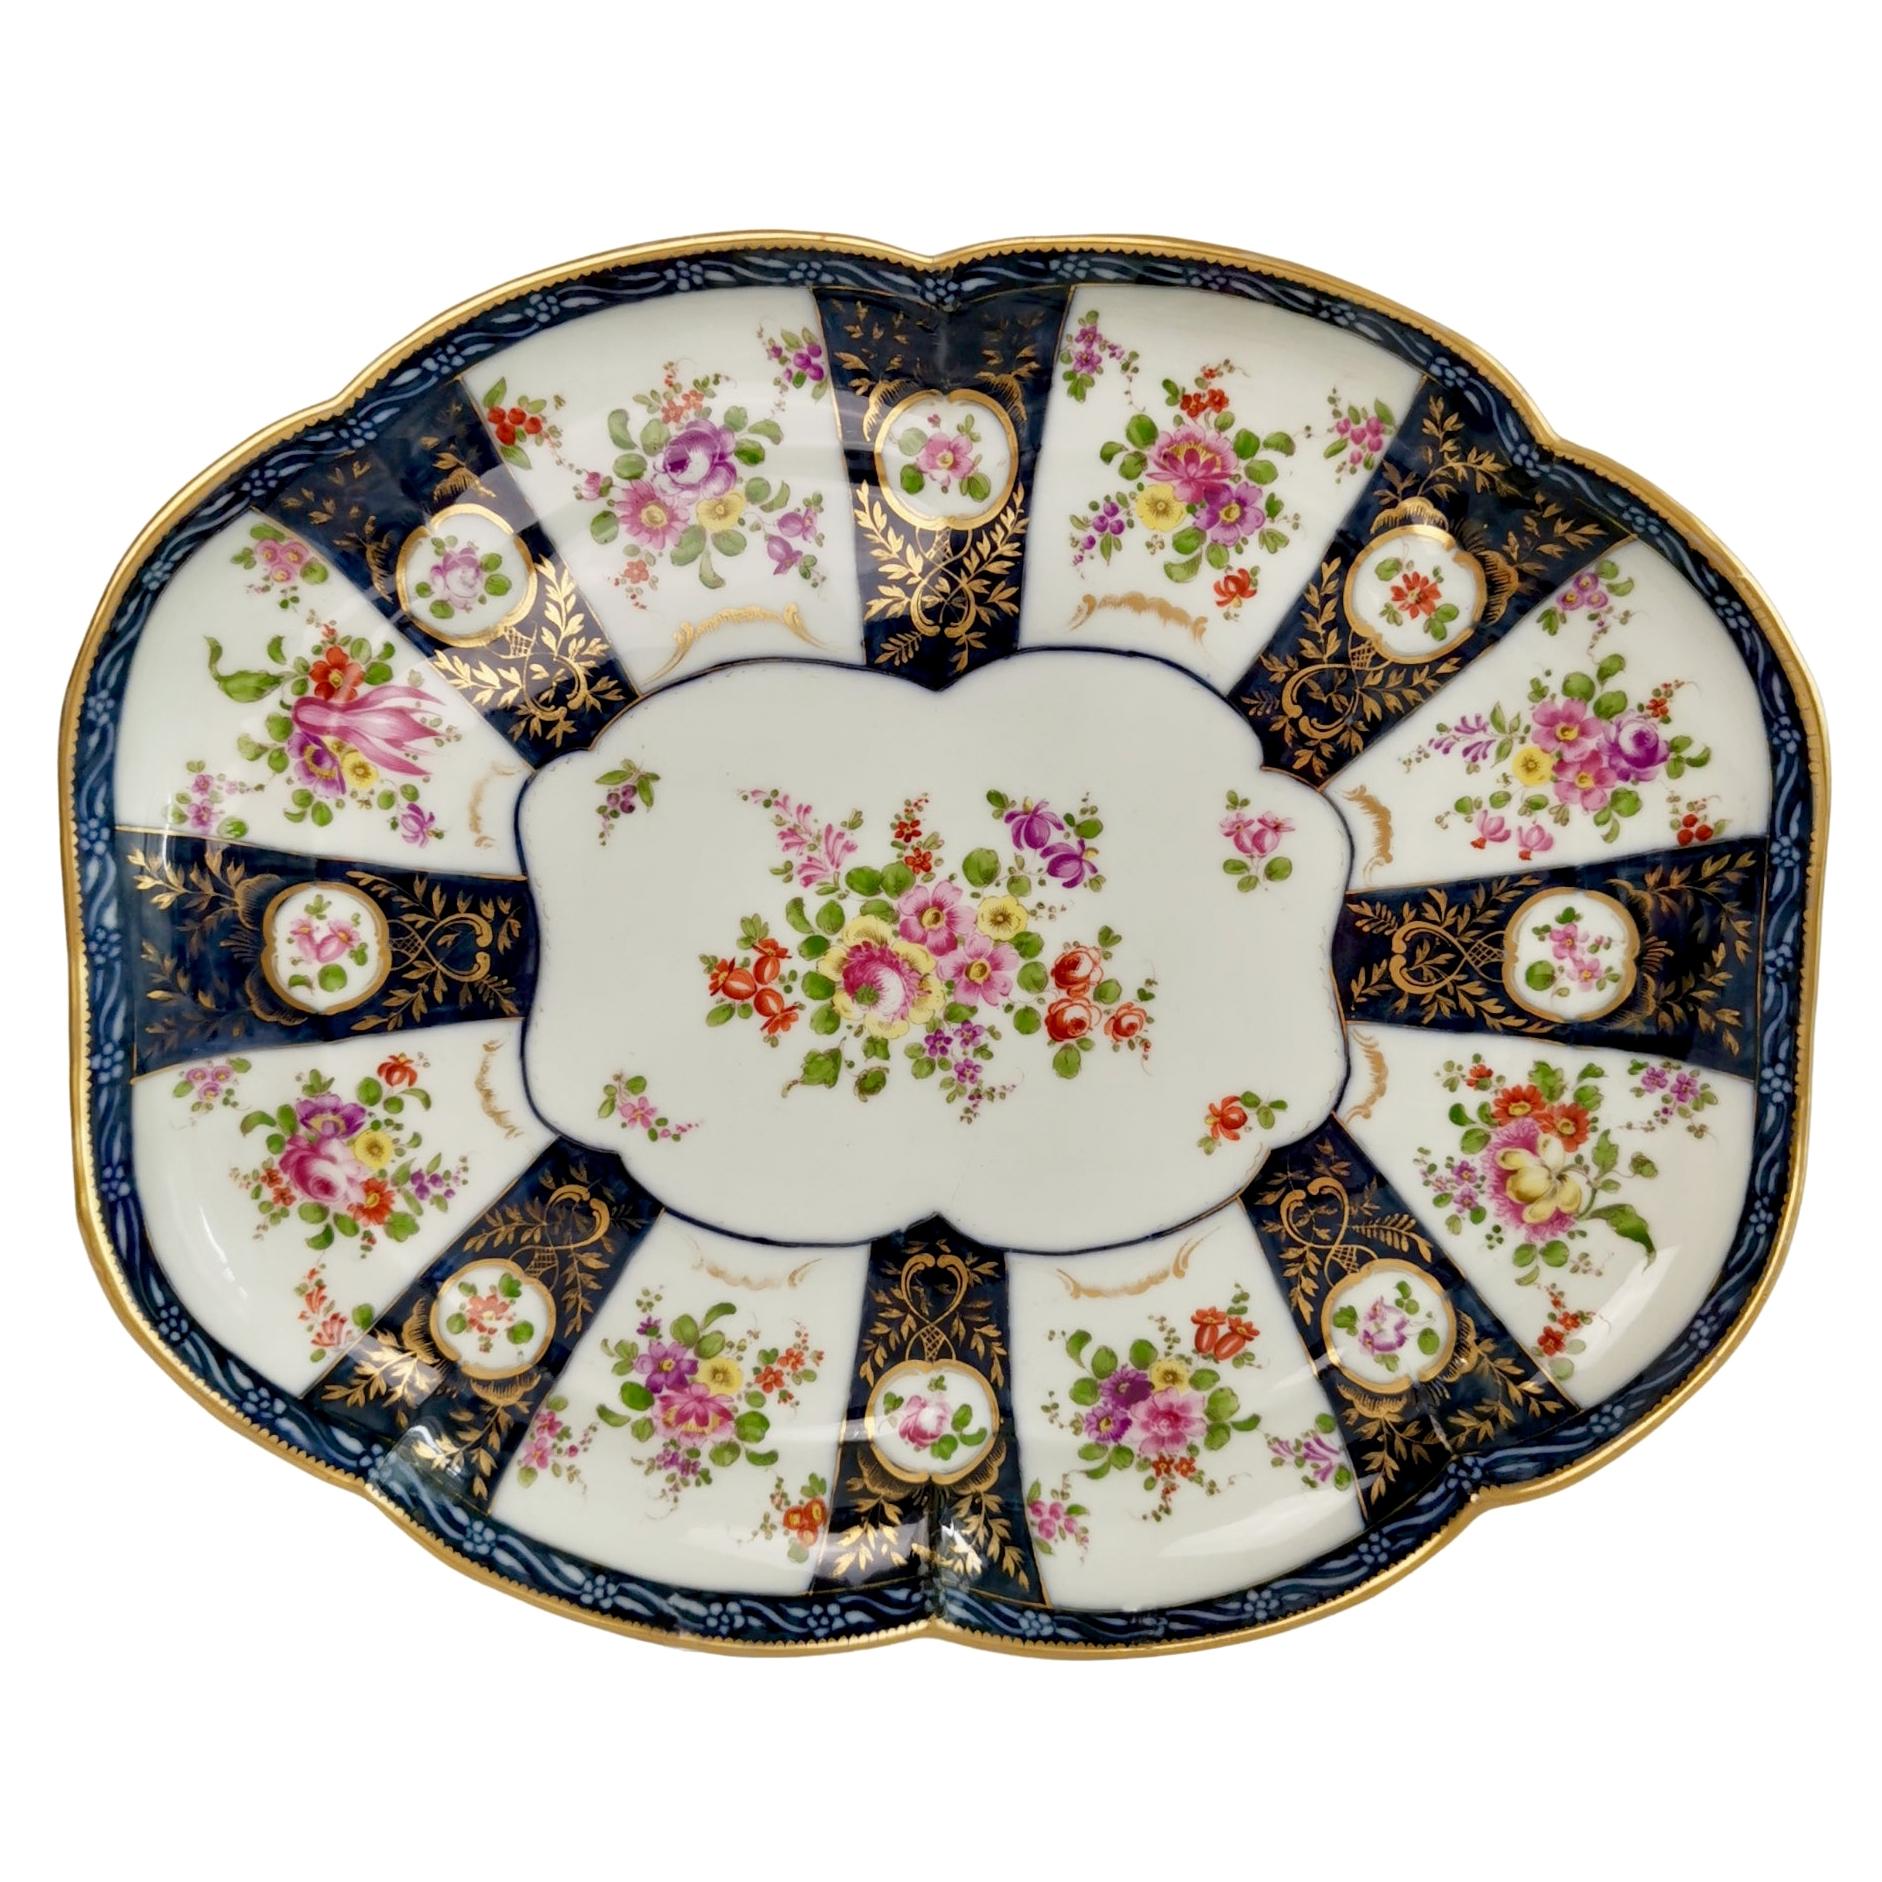 Edmé Samson Porcelain Cabaret Tray, Worcester Style Blue with Flowers, 19th C For Sale